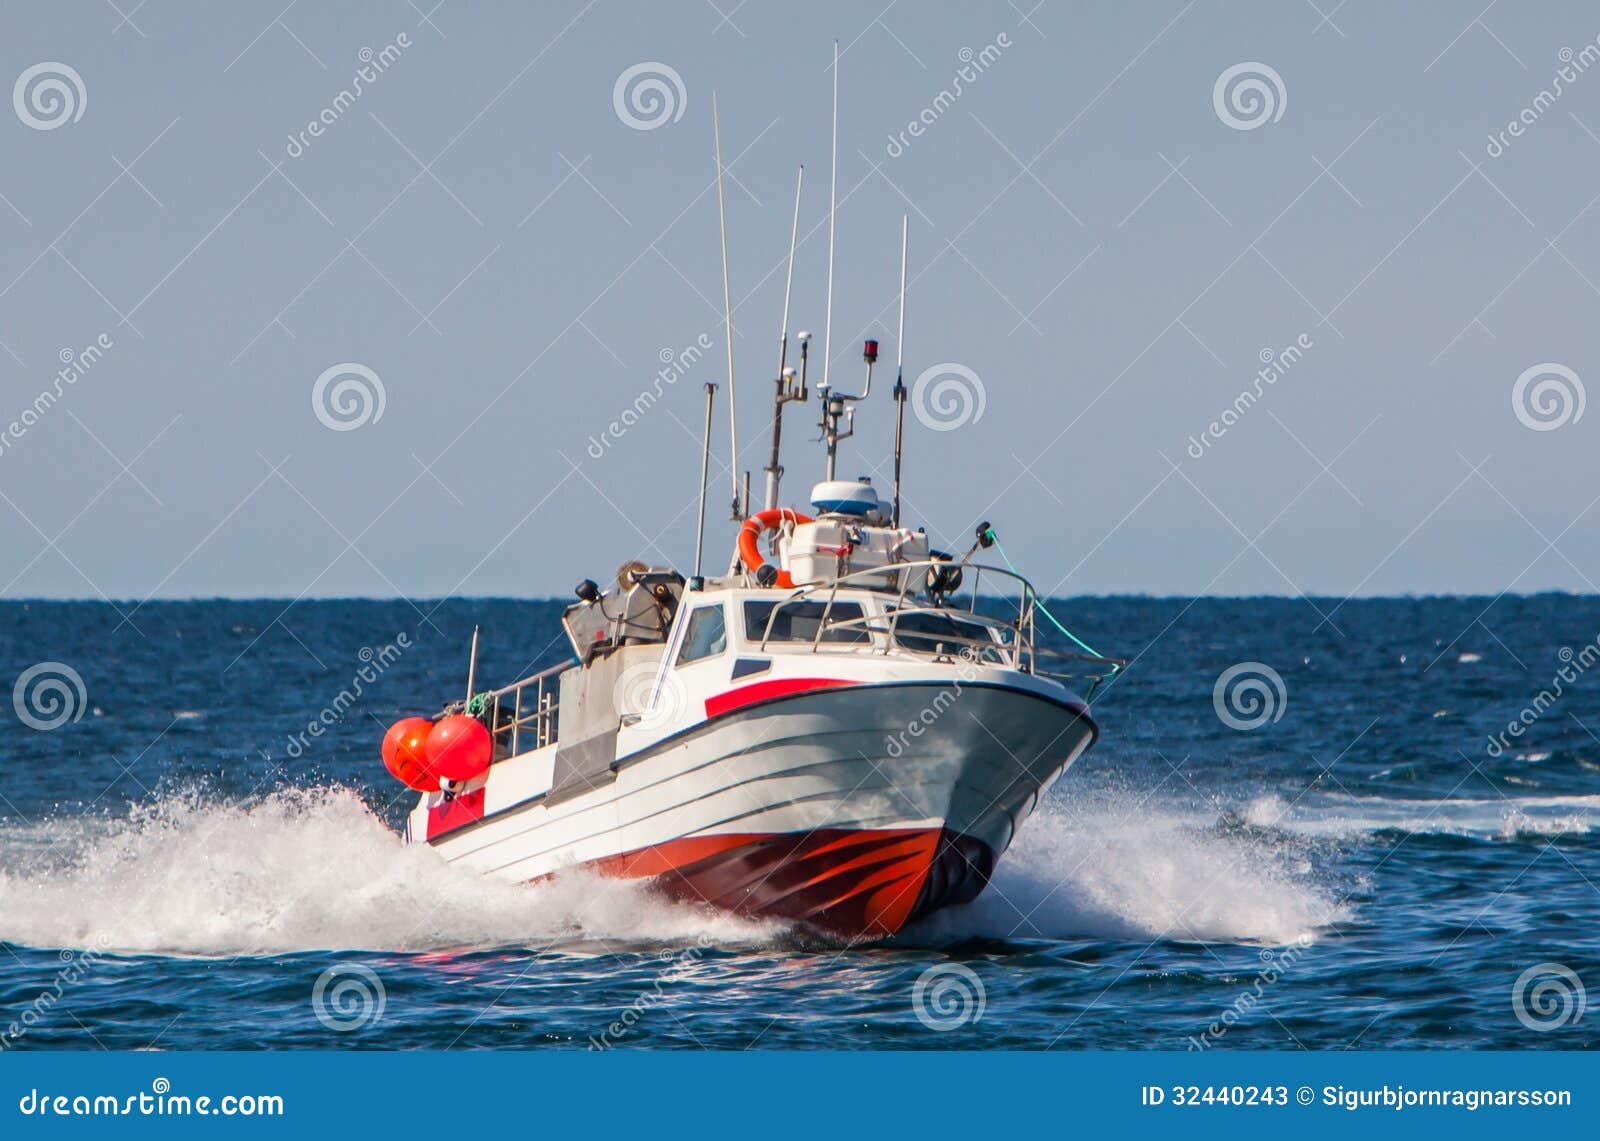 Offshore commercial high speed fishing boat.